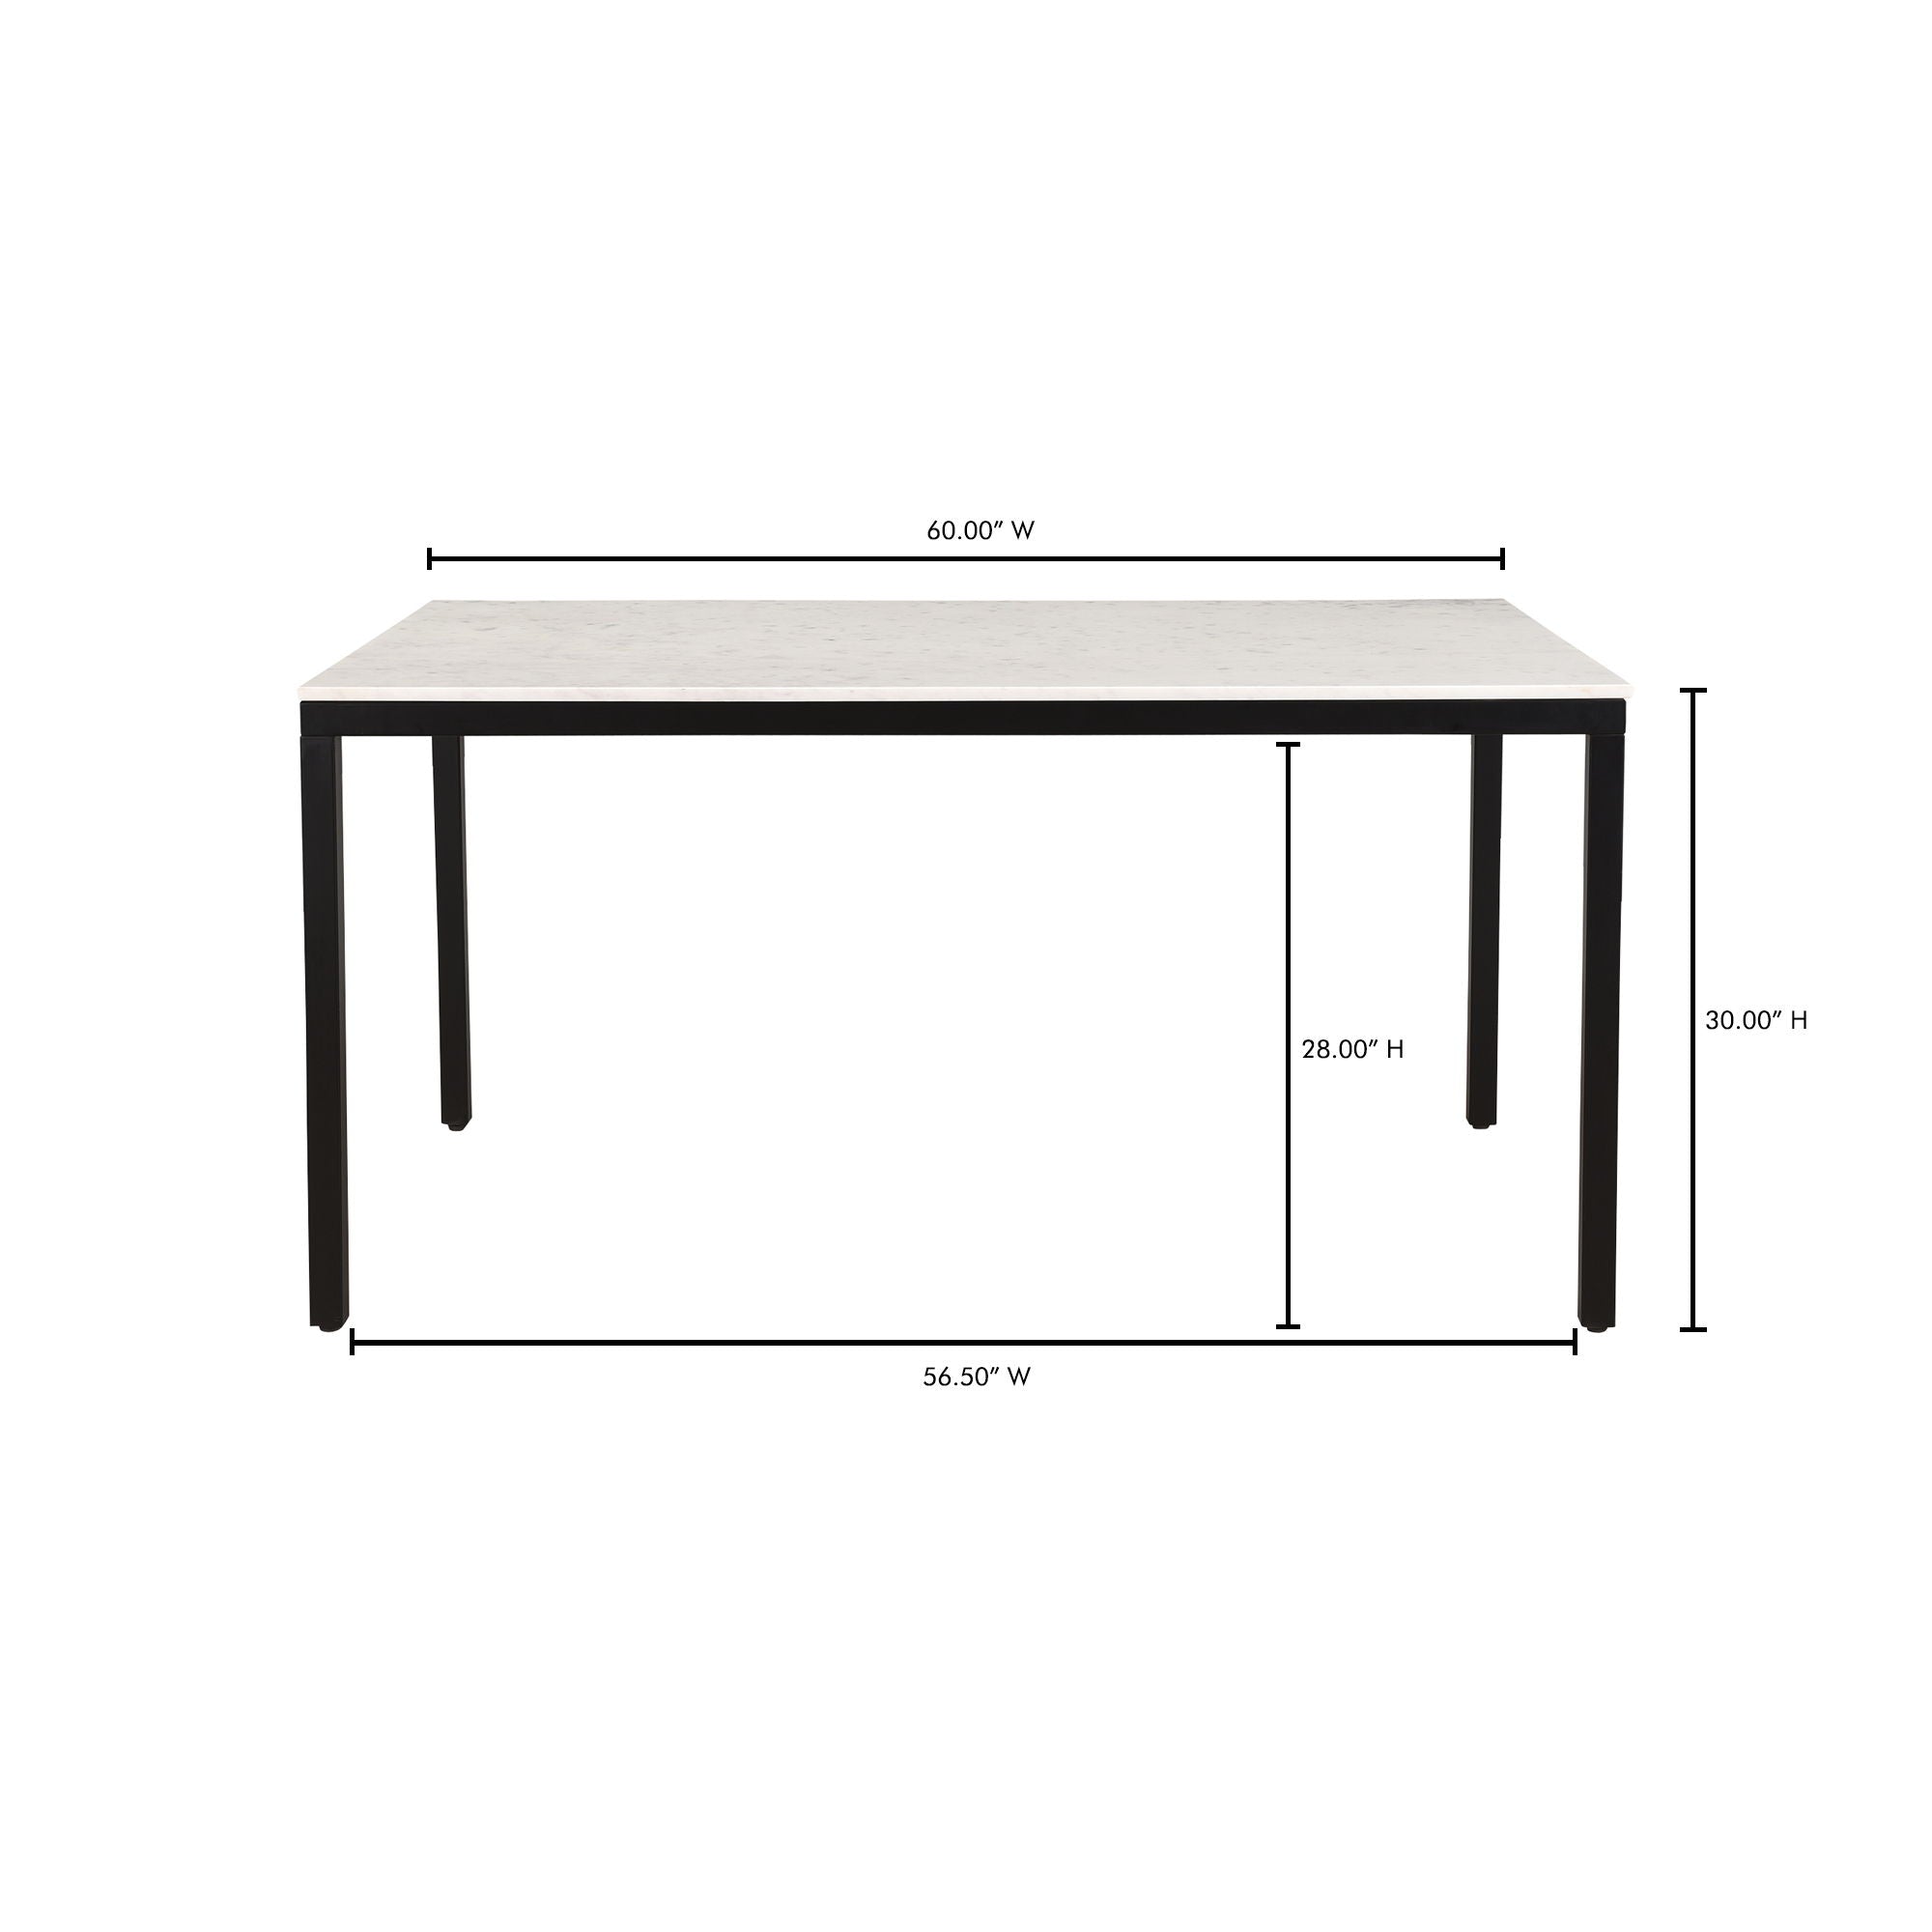 Parson - Marble Dining Table Small - Black